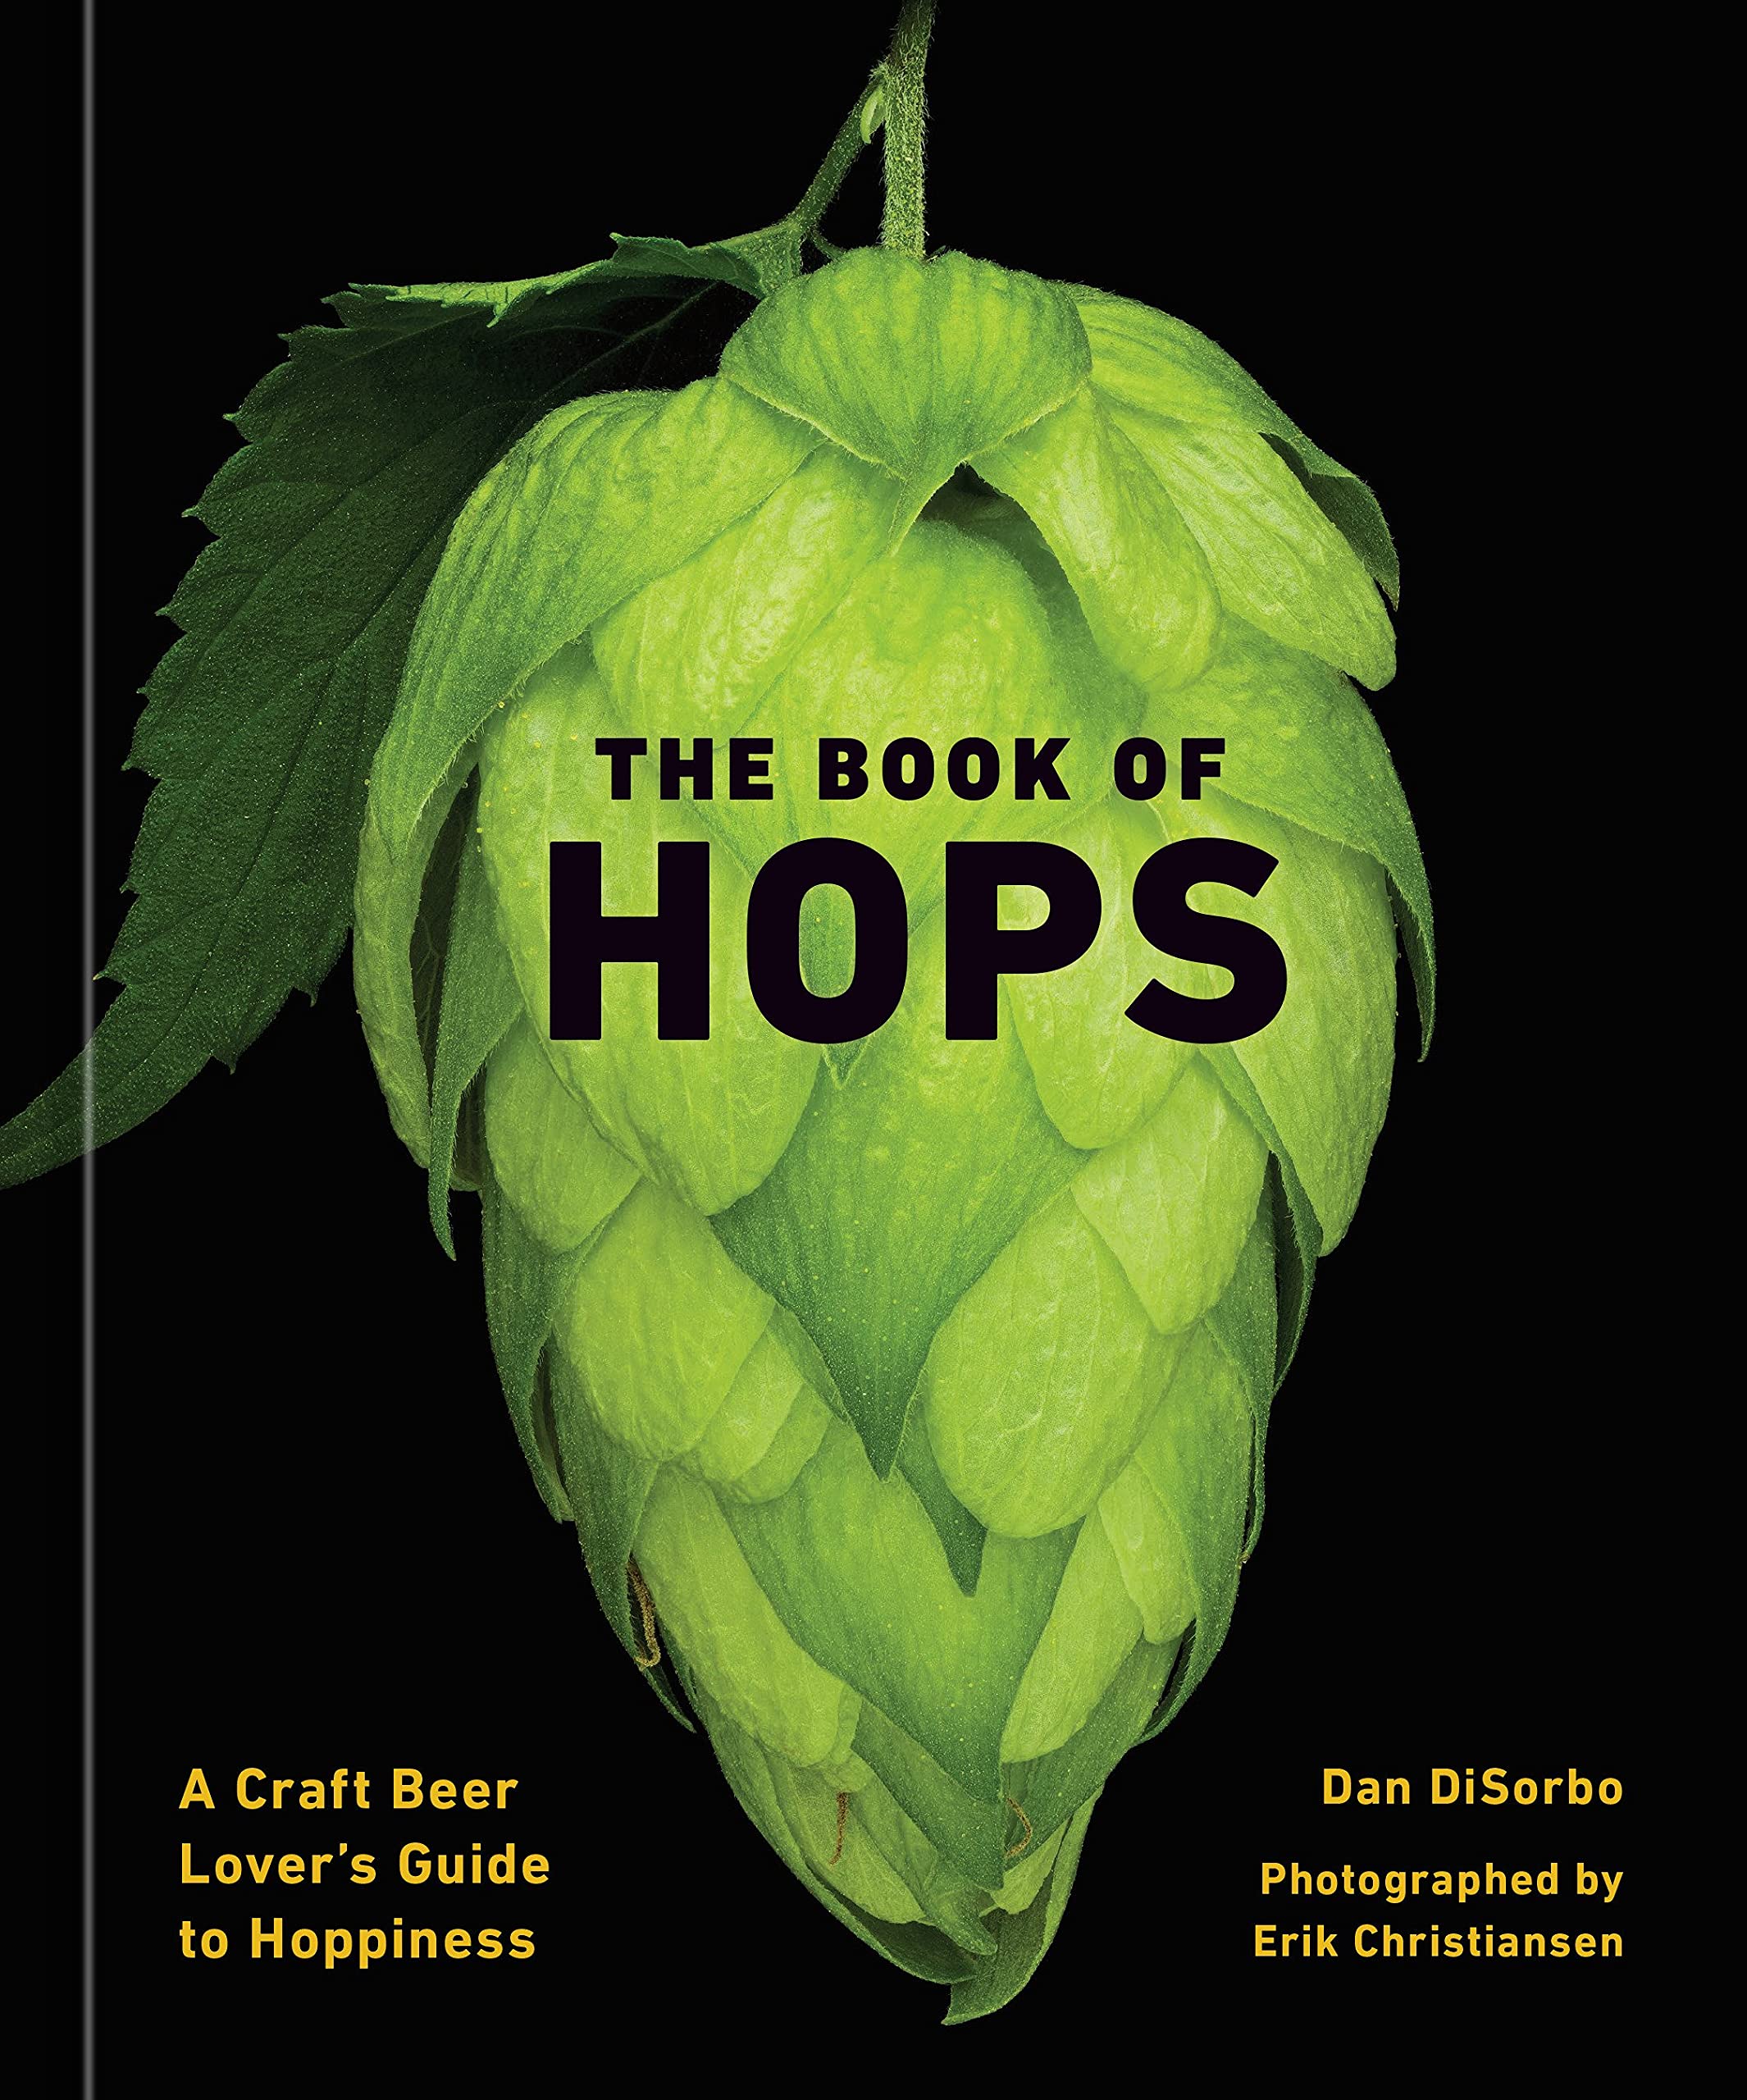 The Book of Hops: A Craft Beer Lover's Guide to Hoppiness (Dan DiSorbo, Erik Christiansen)